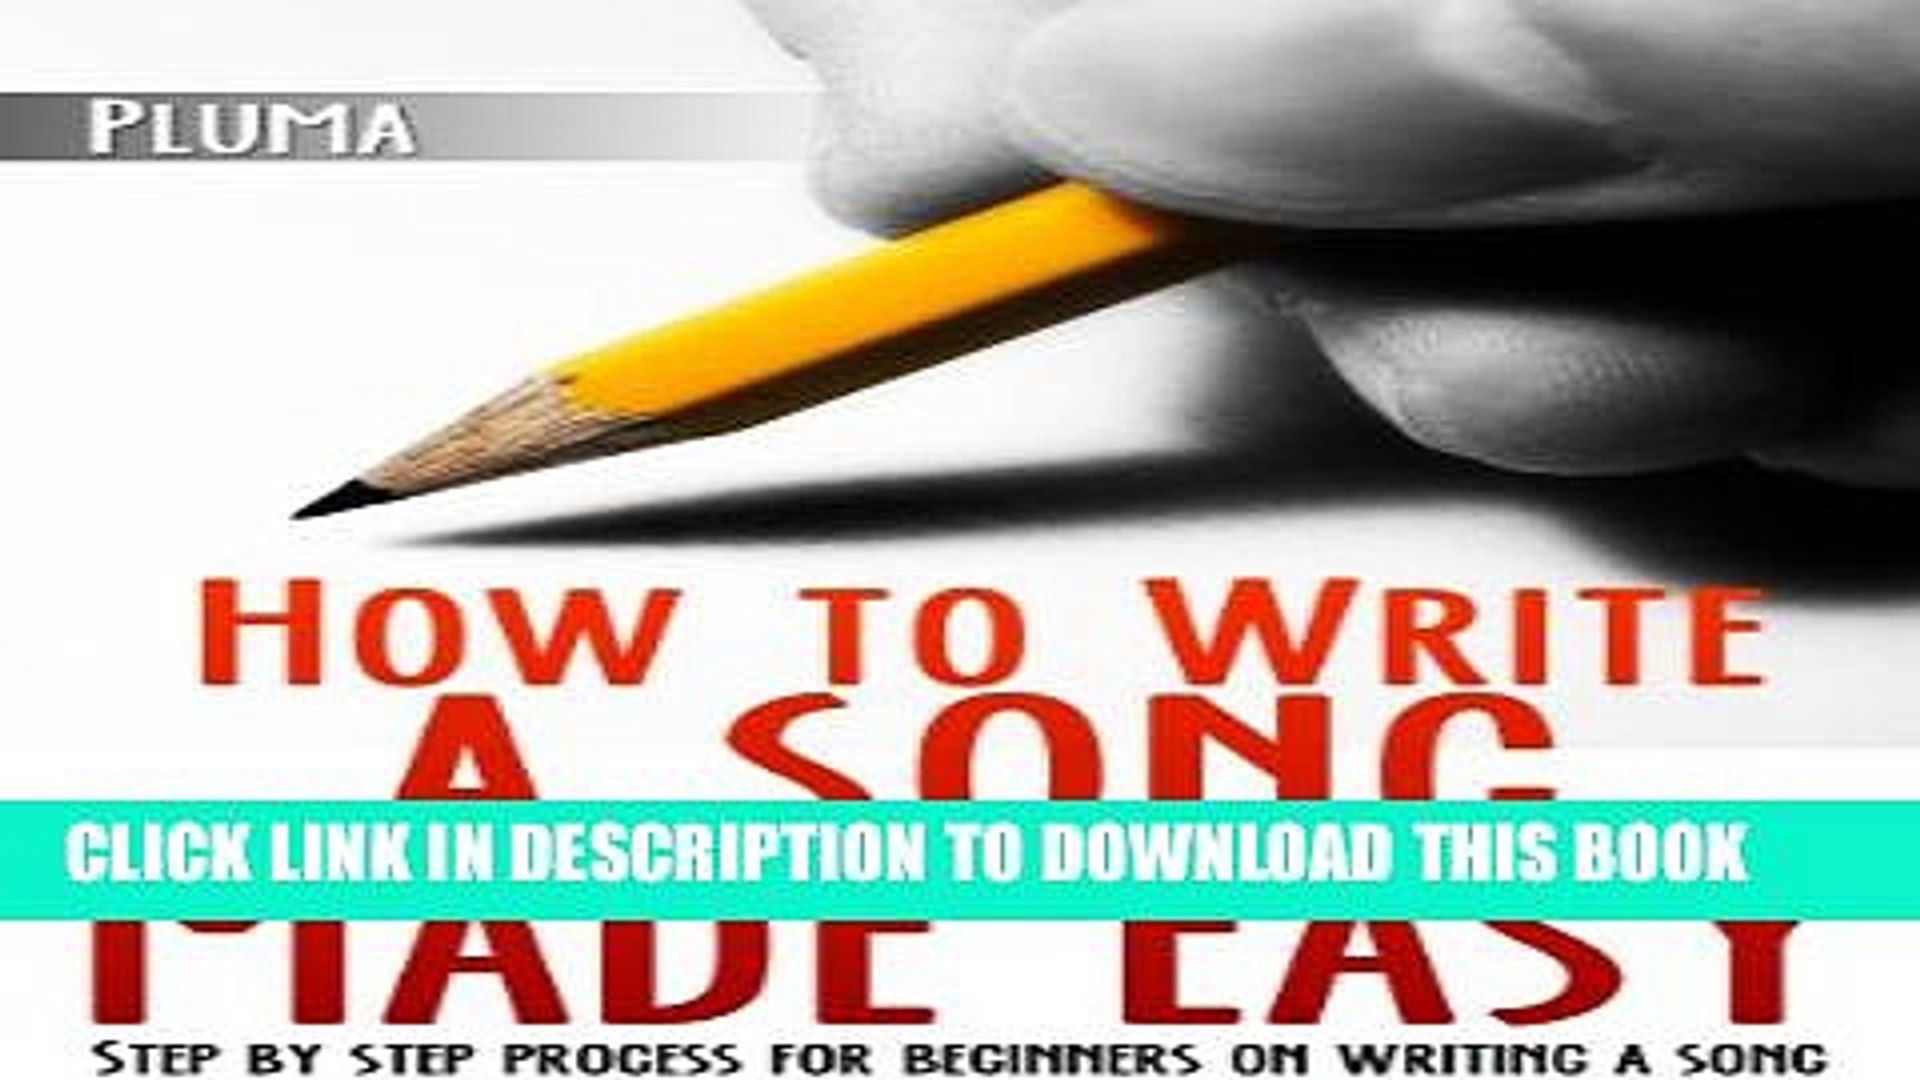 [New] How To Write a Song Made Easy: Step by Step Process for Beginners to  Writing a Song